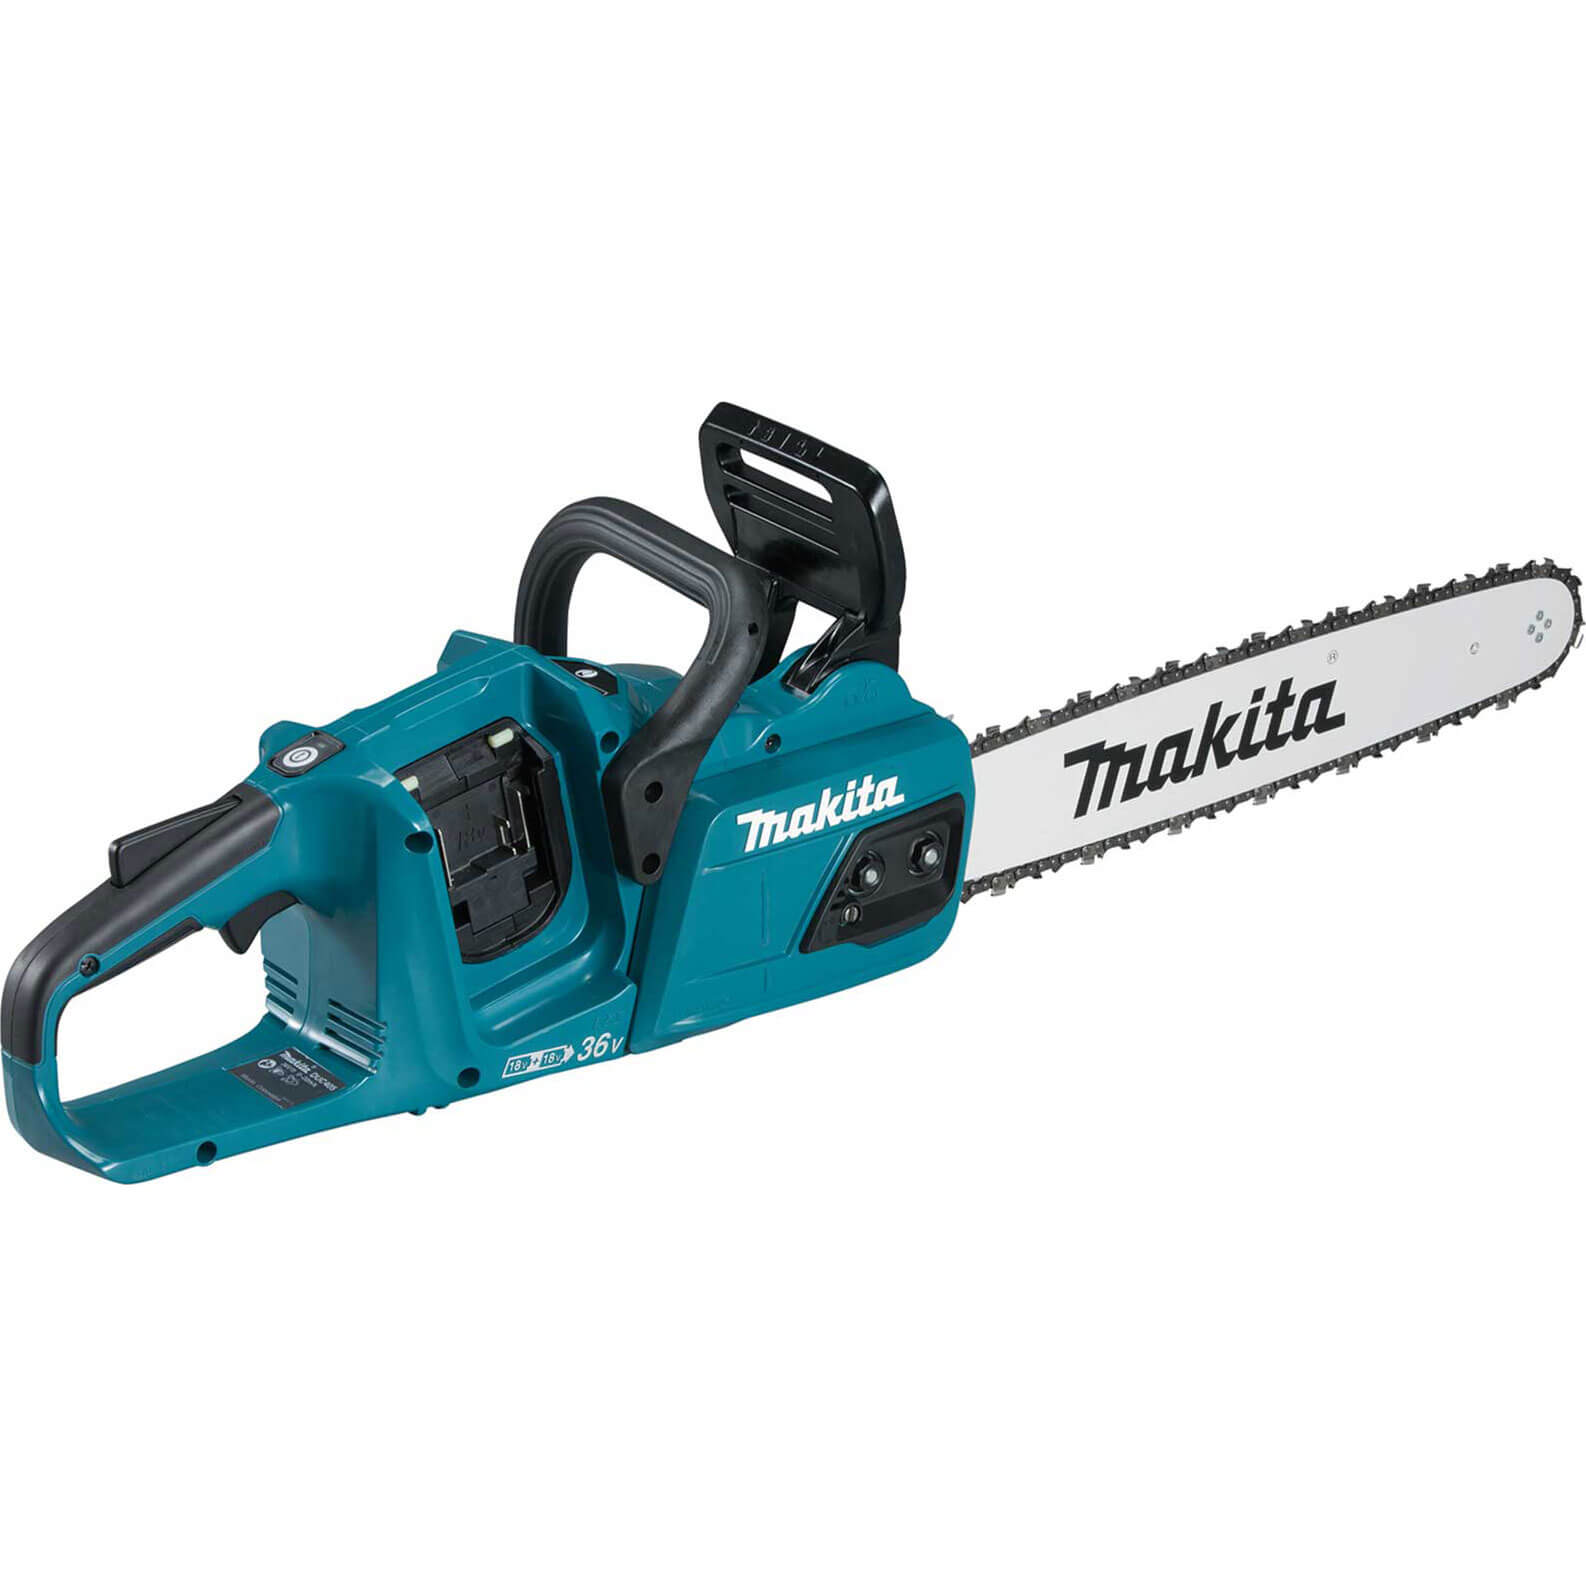 Makita DUC405 Twin 18v LXT Cordless Brushless Chainsaw 400mm No Batteries No Charger